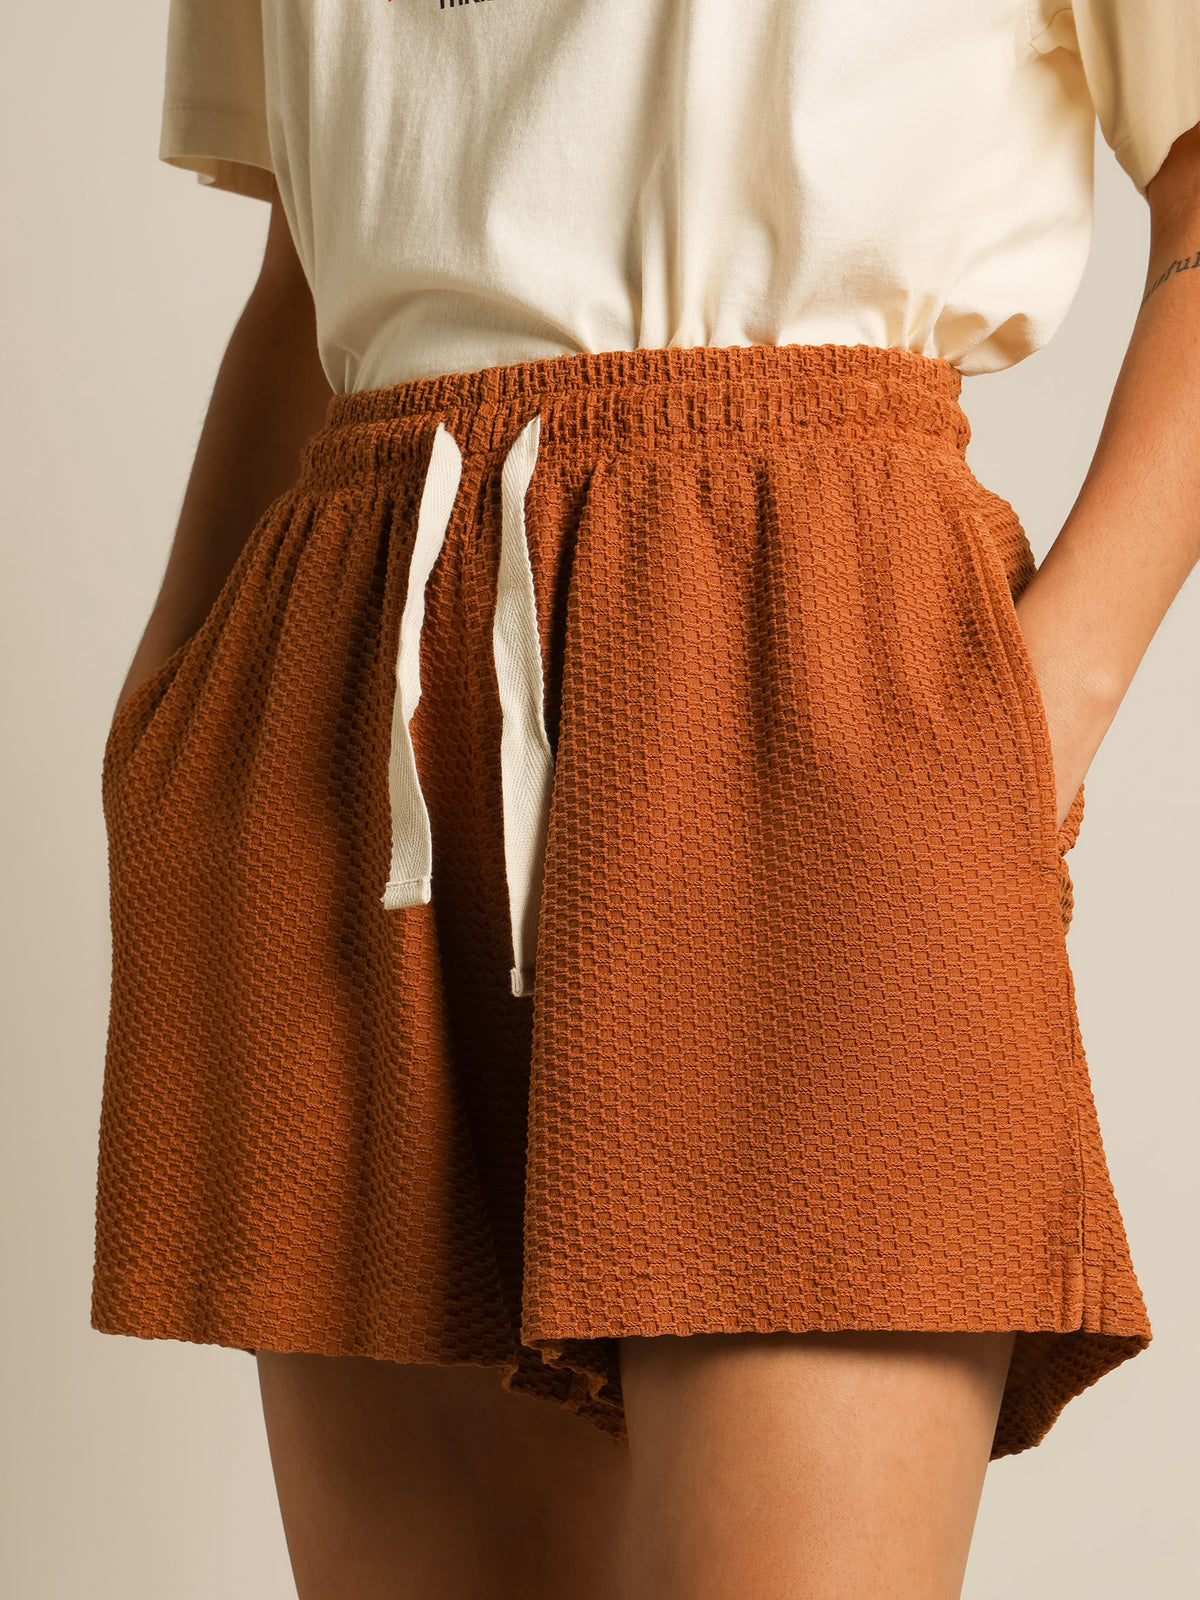 Honeycomb Field Shorts in Spice Brown